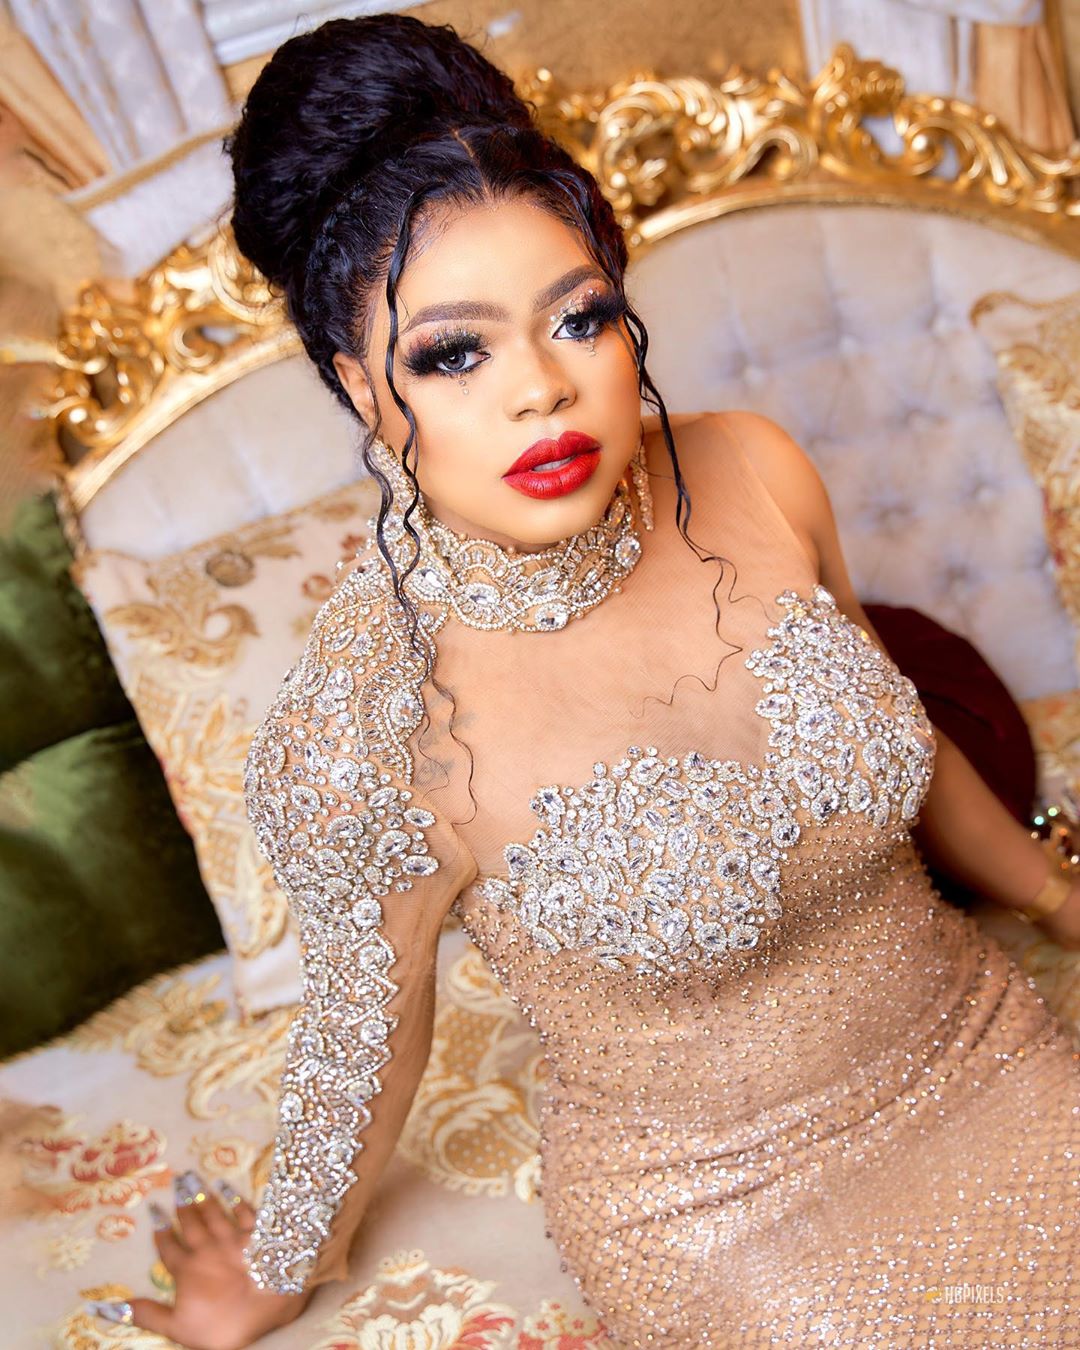 Nigerians express shock over amount of money Bobrisky dropped at father's funeral